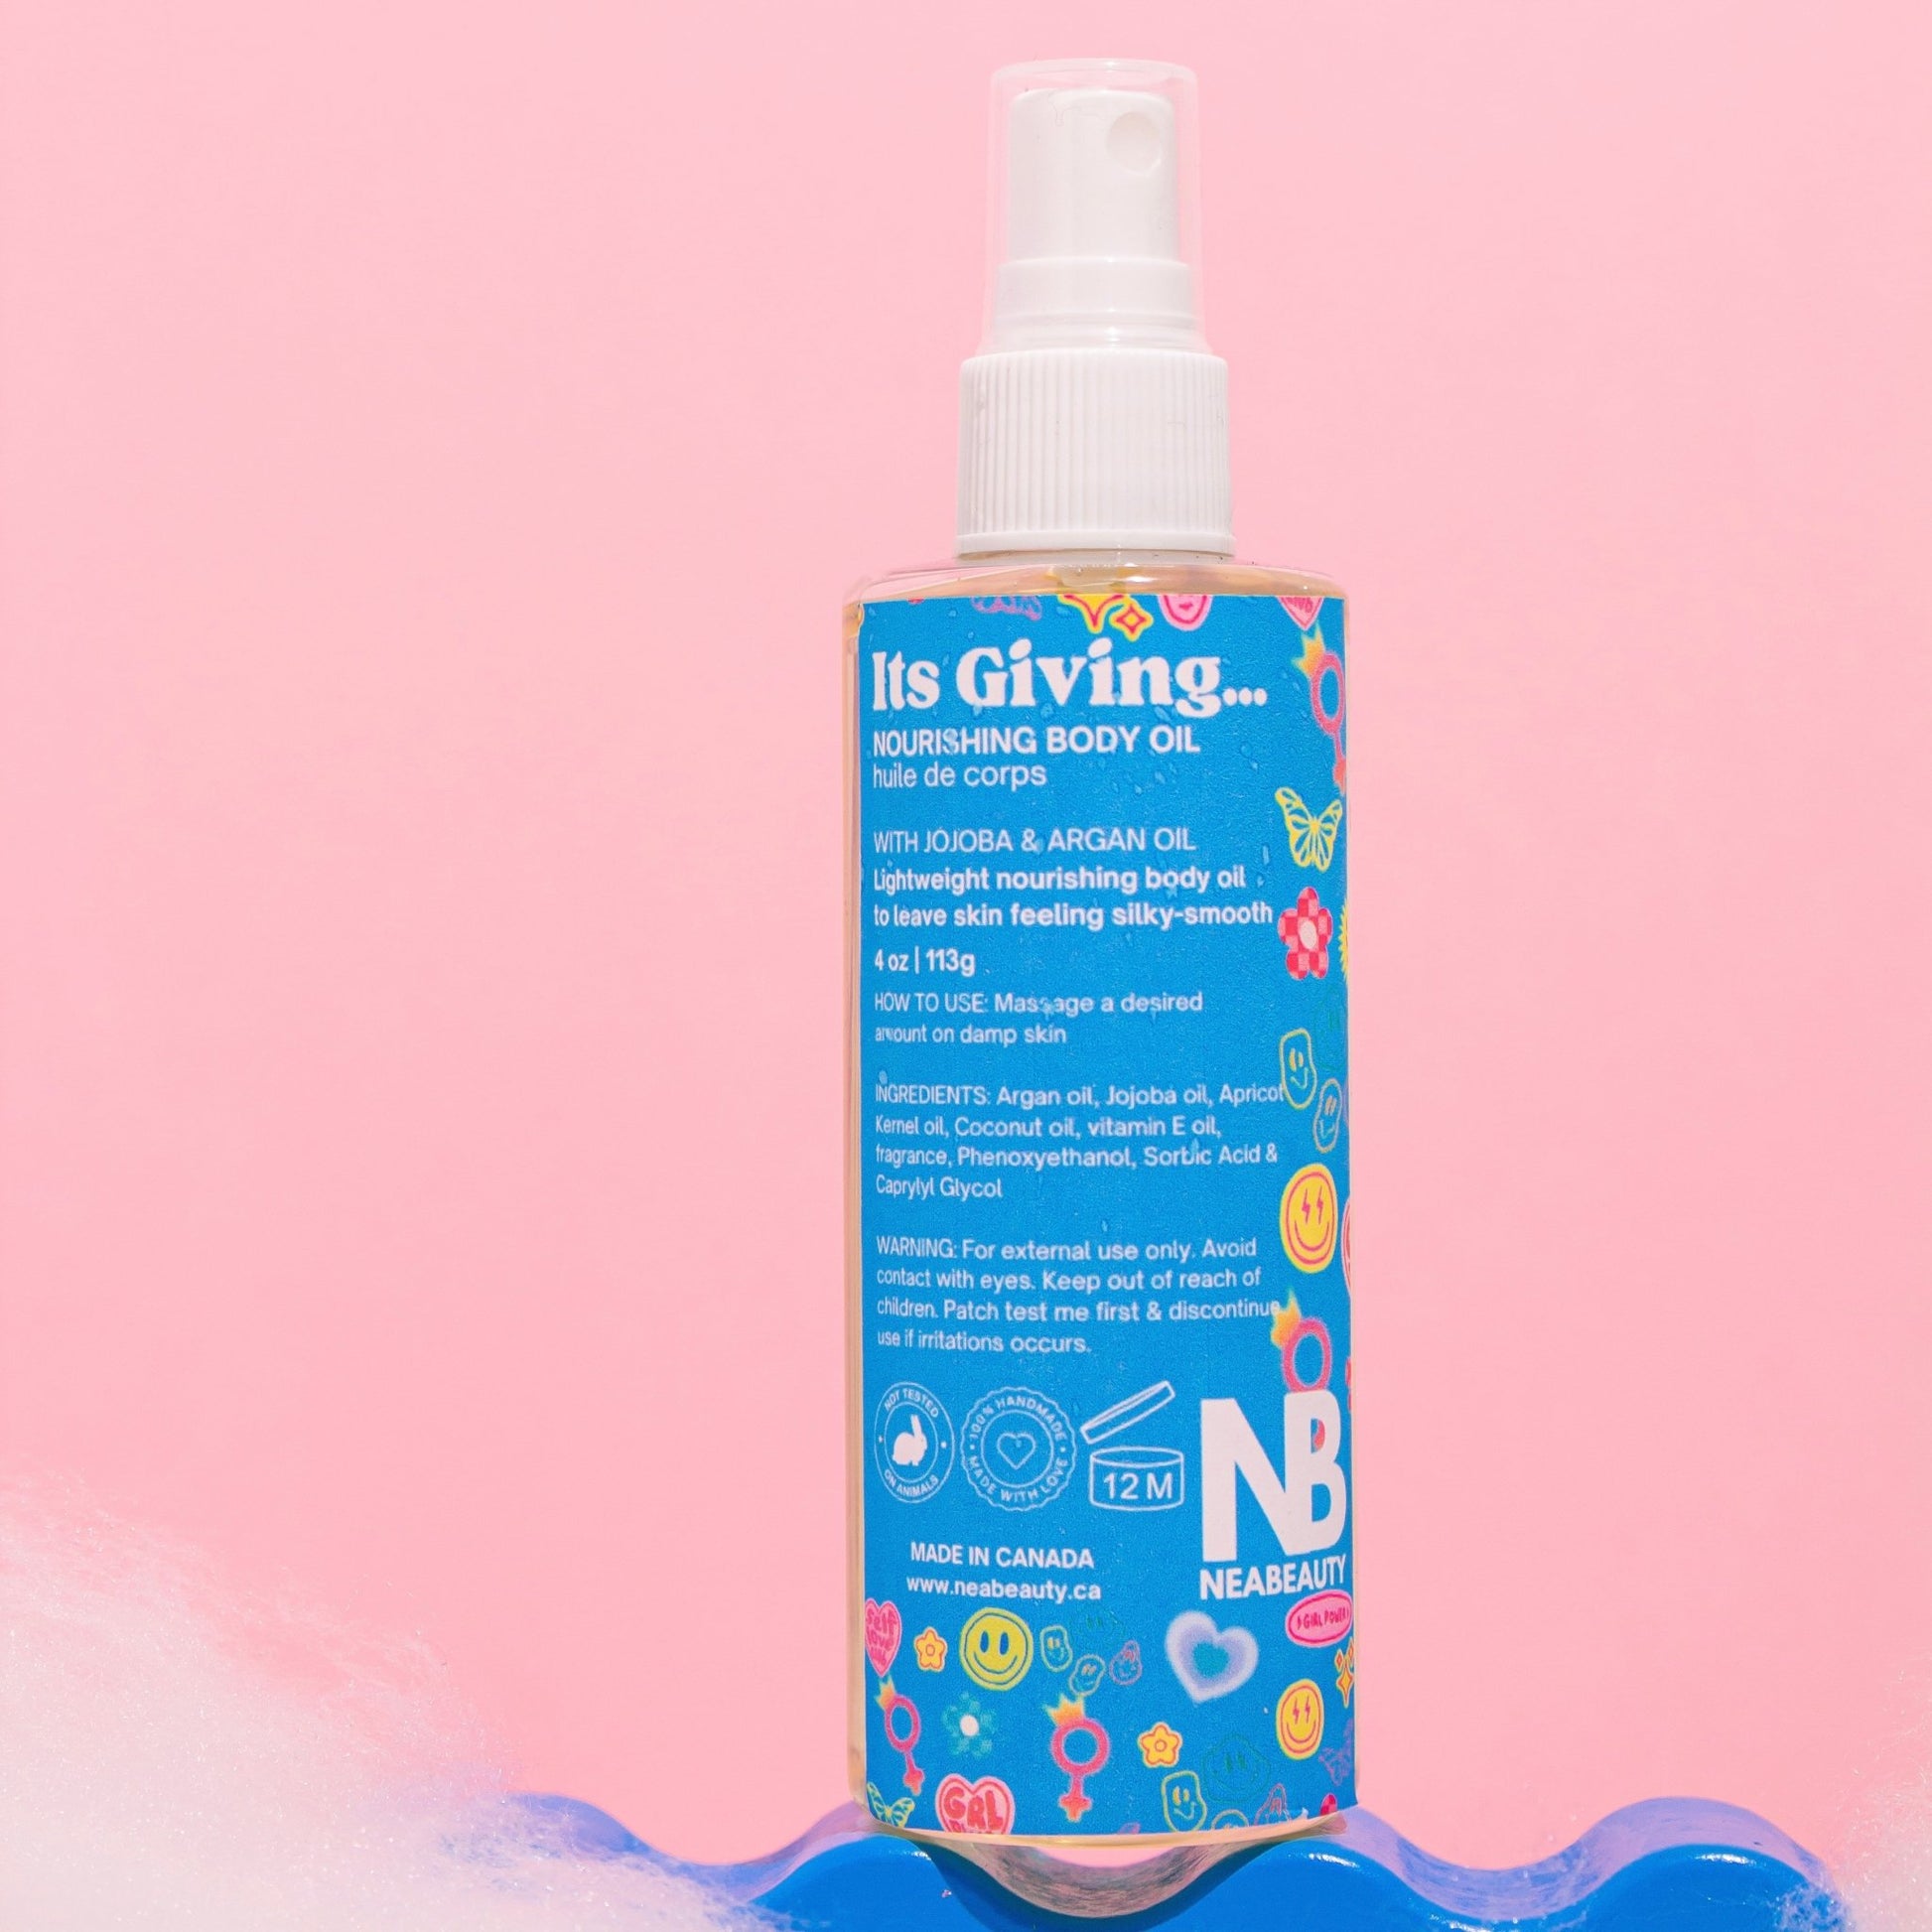 ITS GIVING BODY OIL - NEABEAUTY